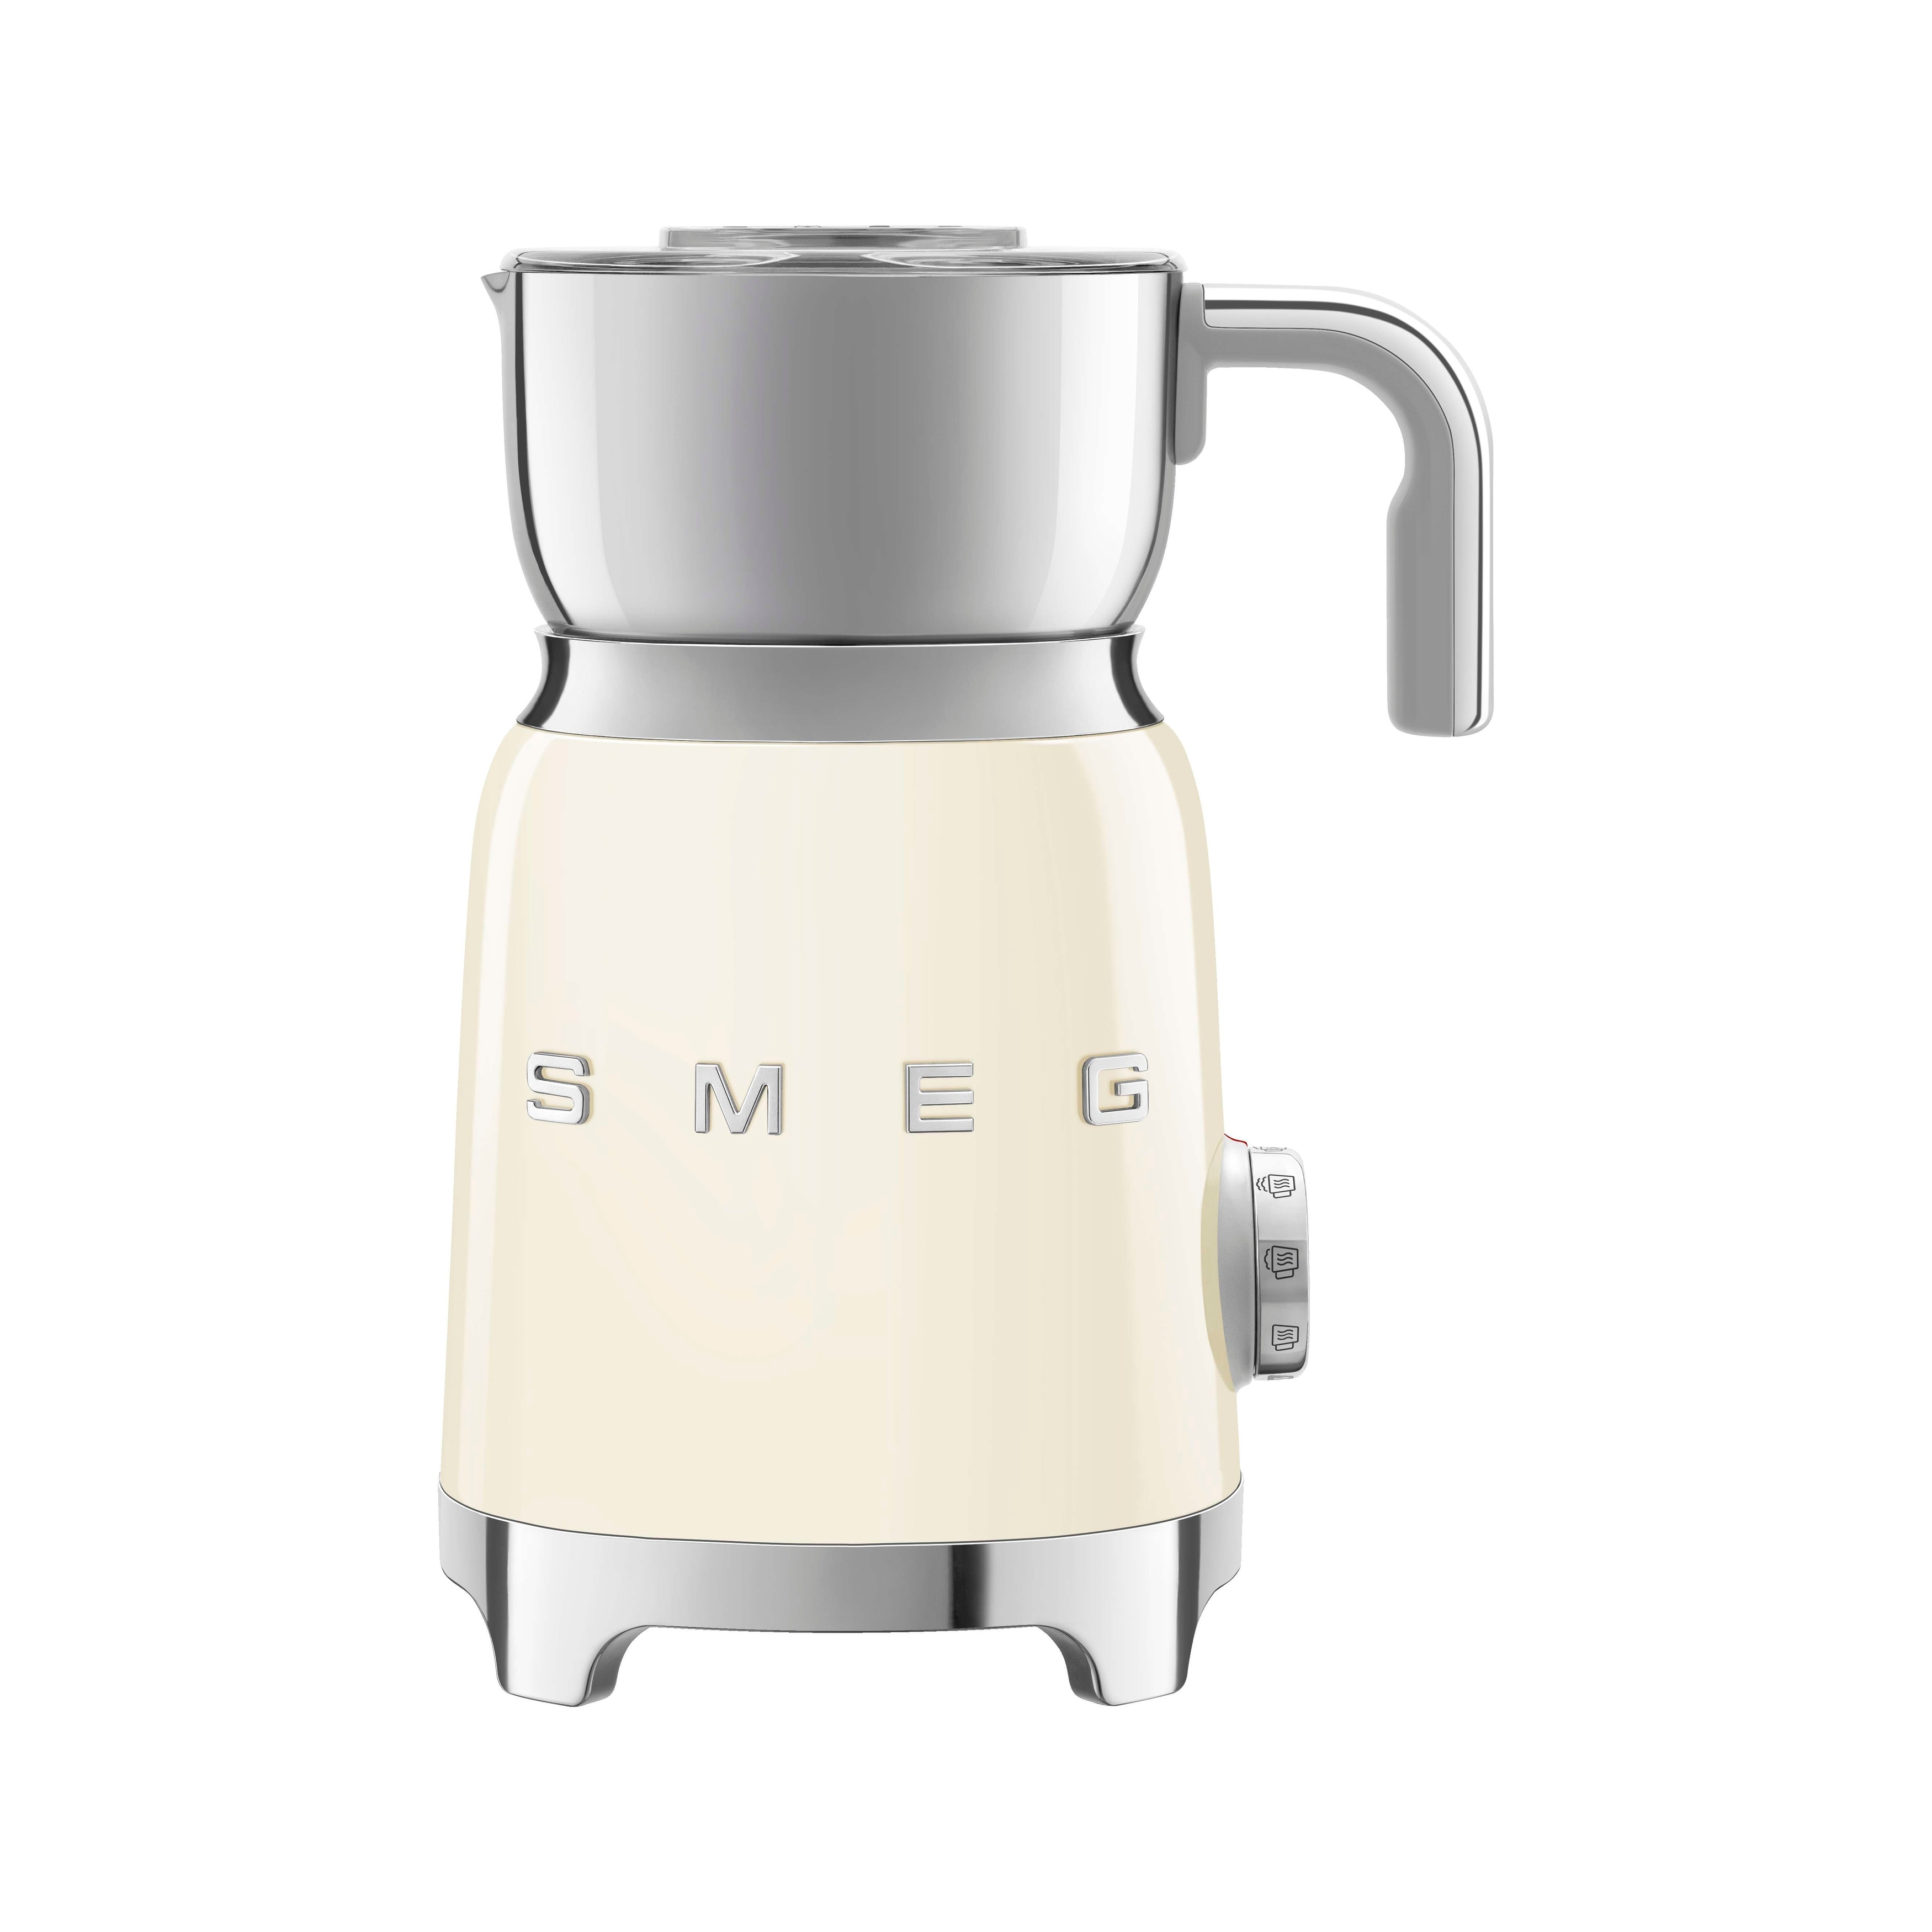 https://ak1.ostkcdn.com/images/products/is/images/direct/8556367fe3029cd3e7081f82ed840818d6ca7563/SMEG-Milk-Frother-MFF11.jpg